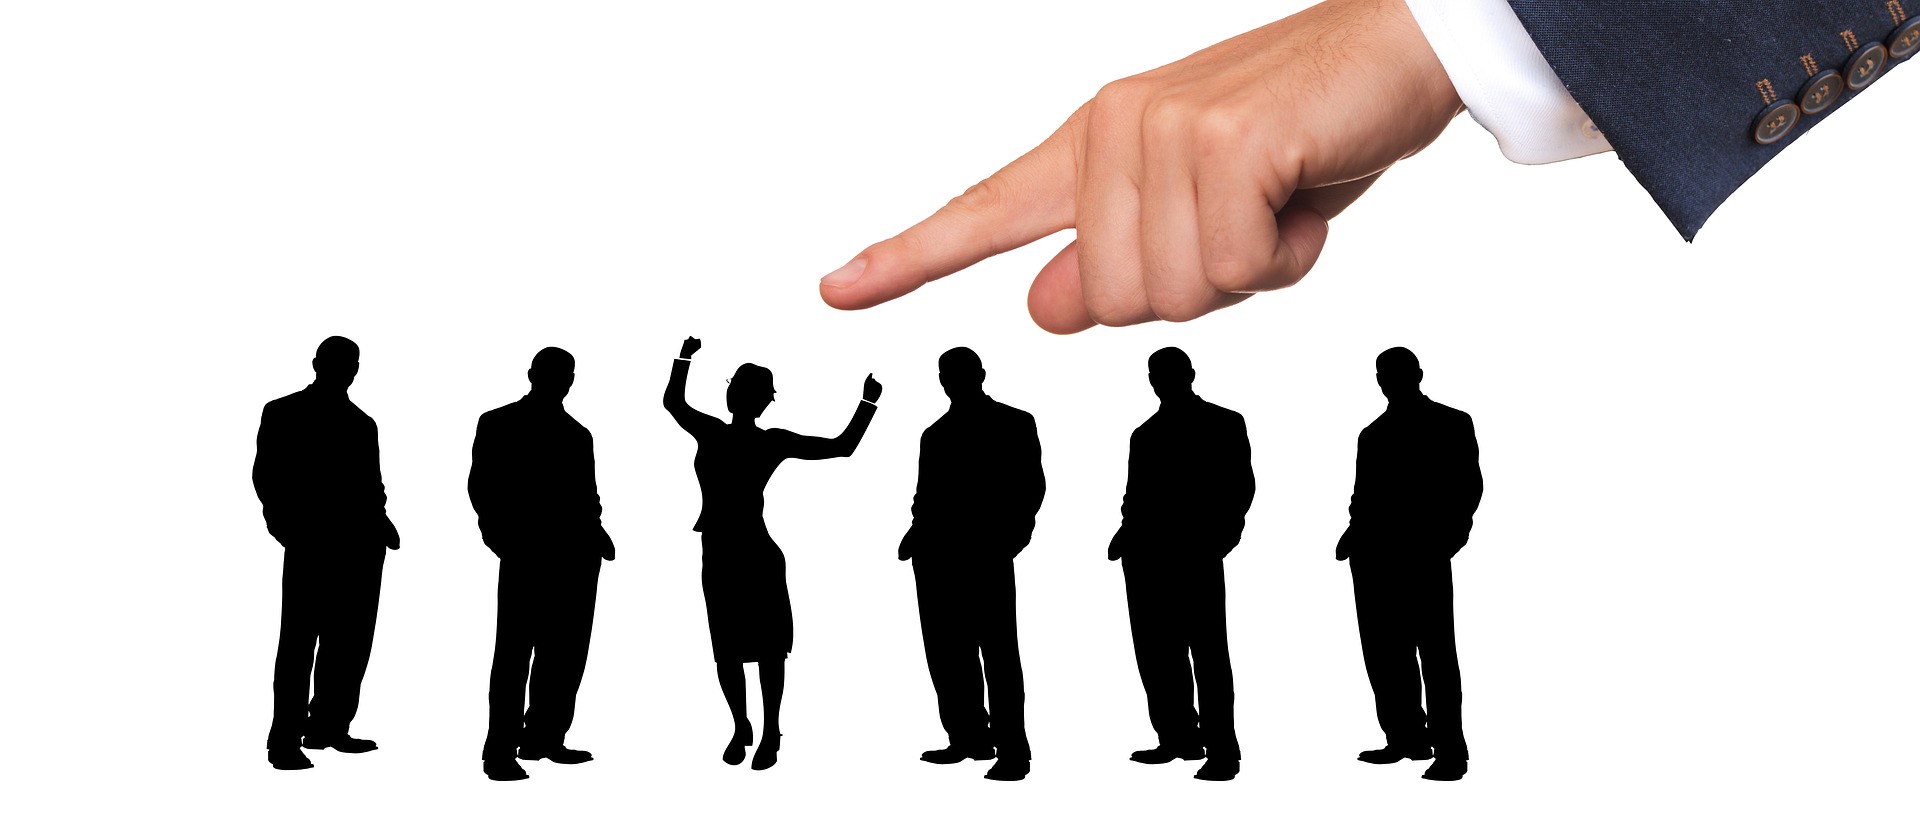 Finger pointing at a woman silhouette in a line of male silhouettes